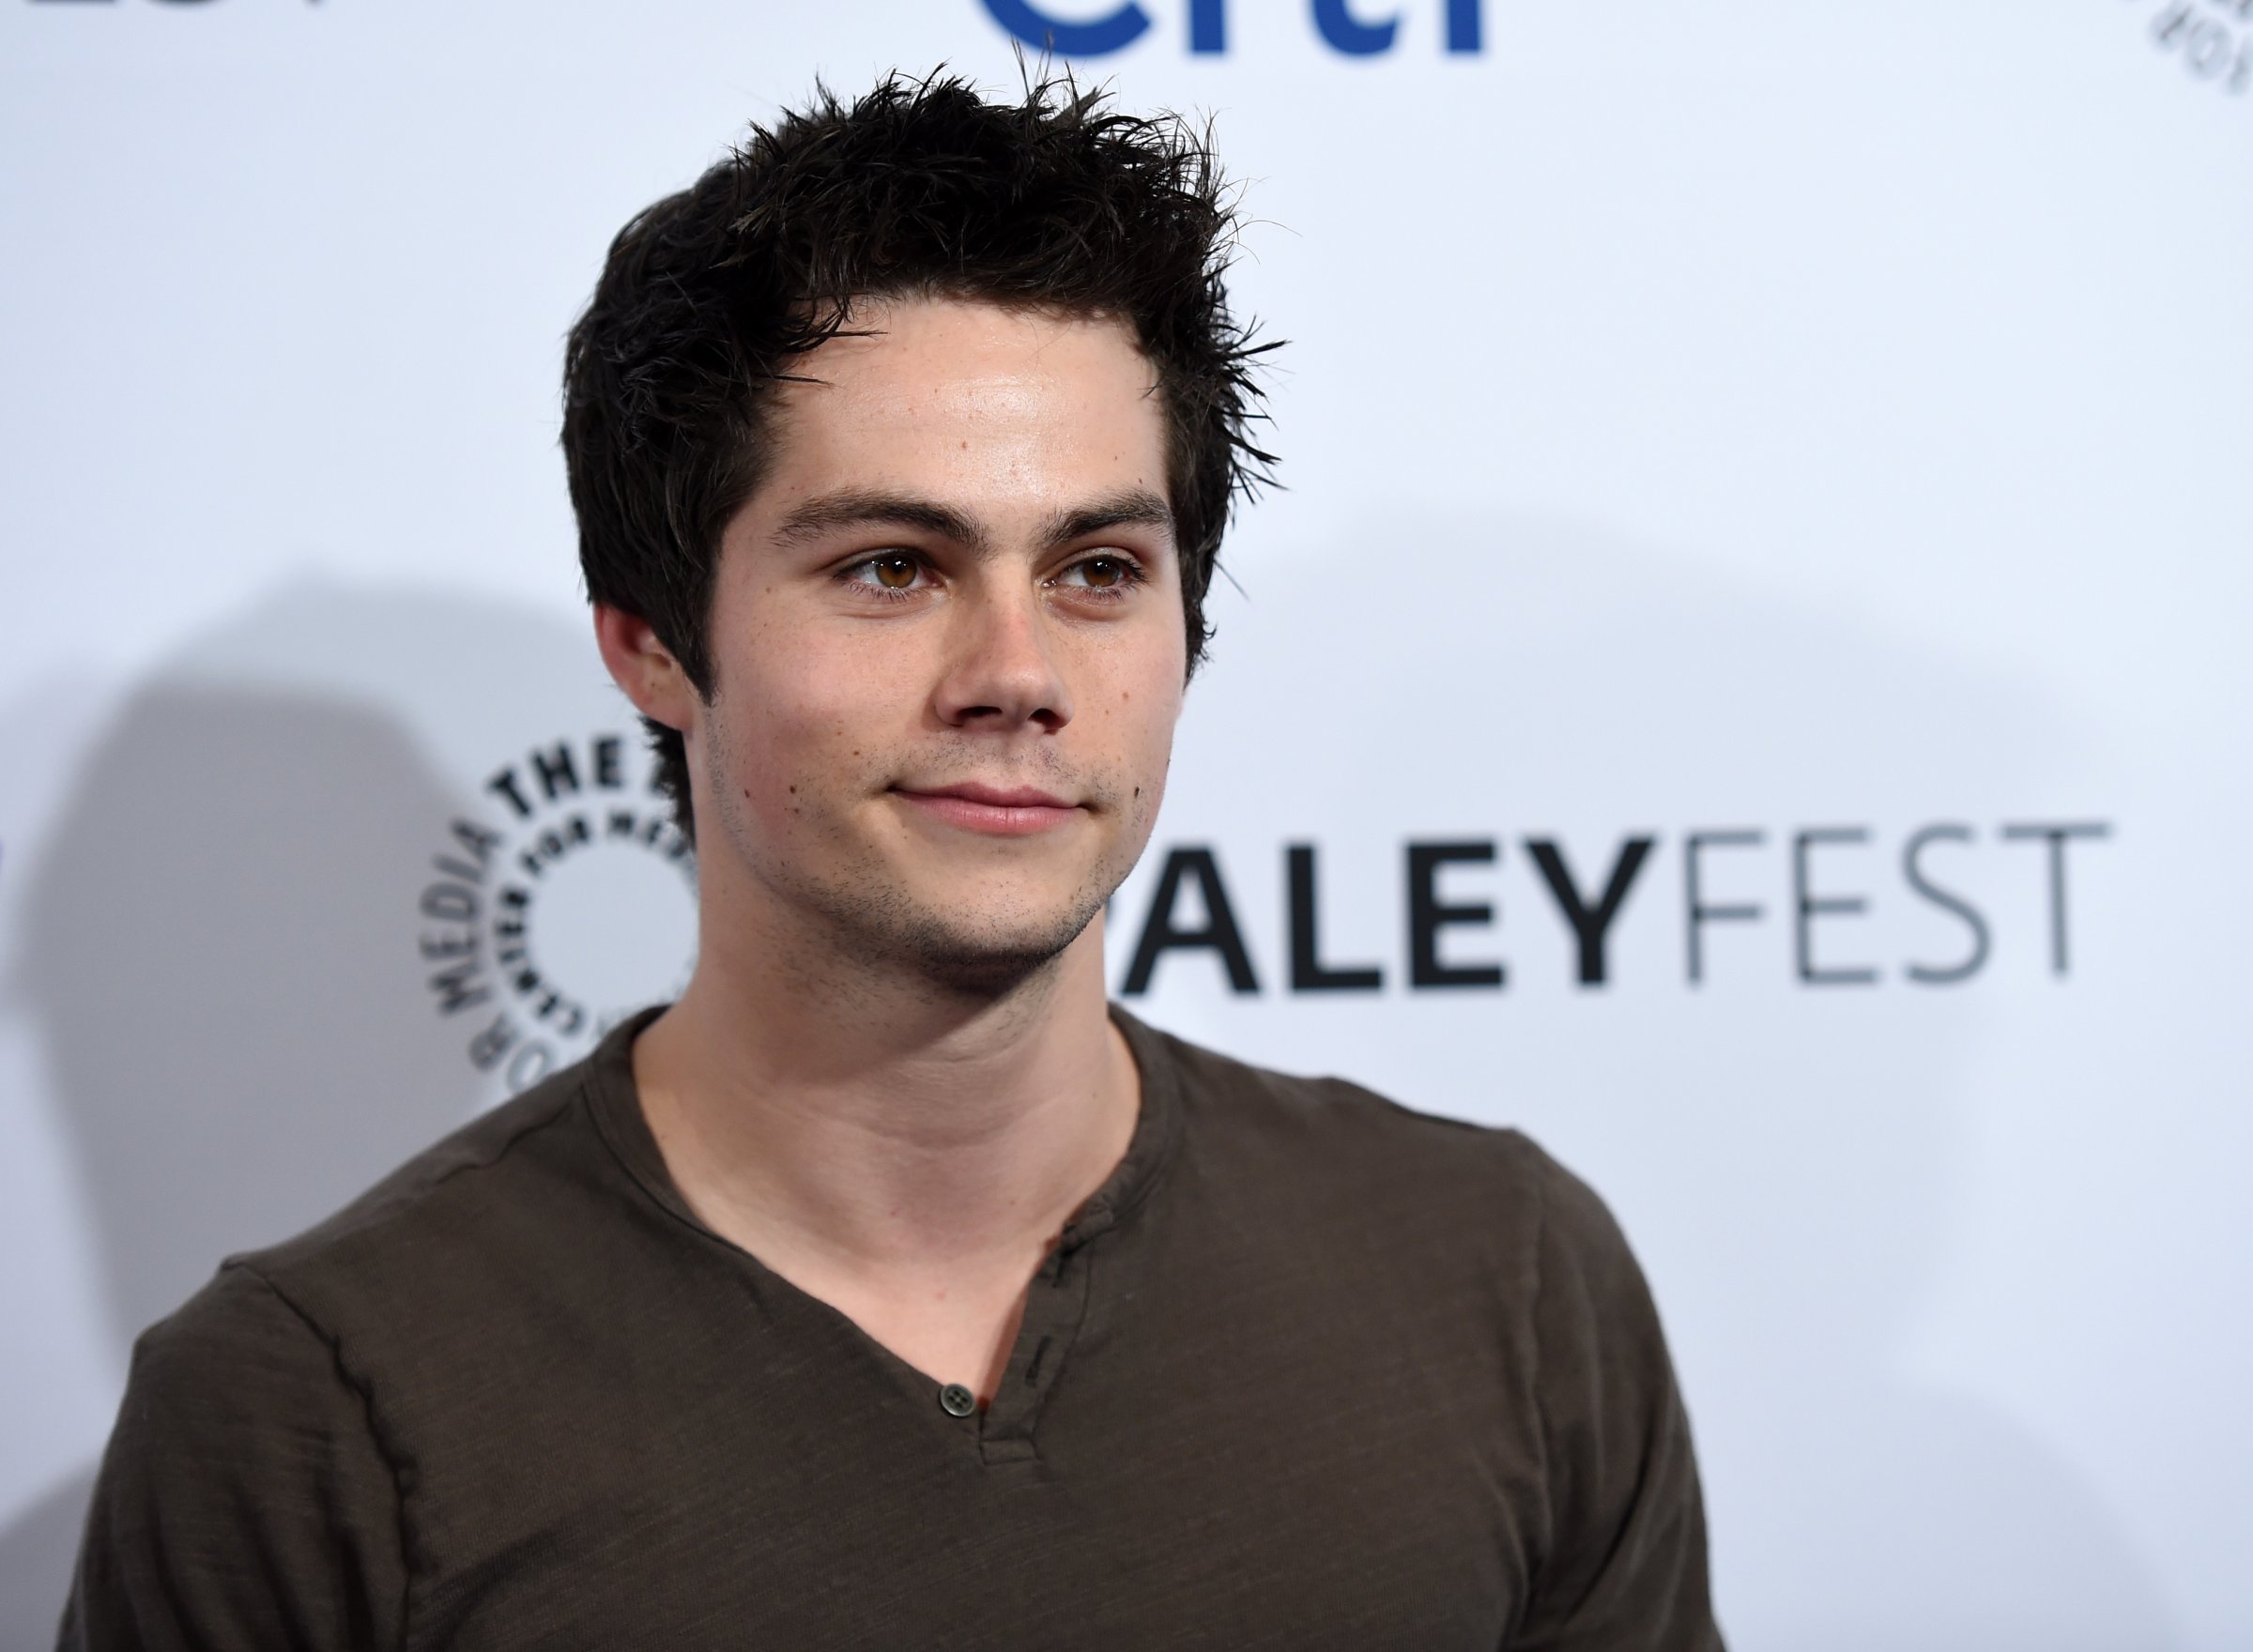 Actor Dylan O'Brien arrives at The Paley Center For Media's 32nd Annual PALEYFEST LA - "Teen Wolf" event at the Dolby Theatre on March 11, 2015 in Hollywood, California.